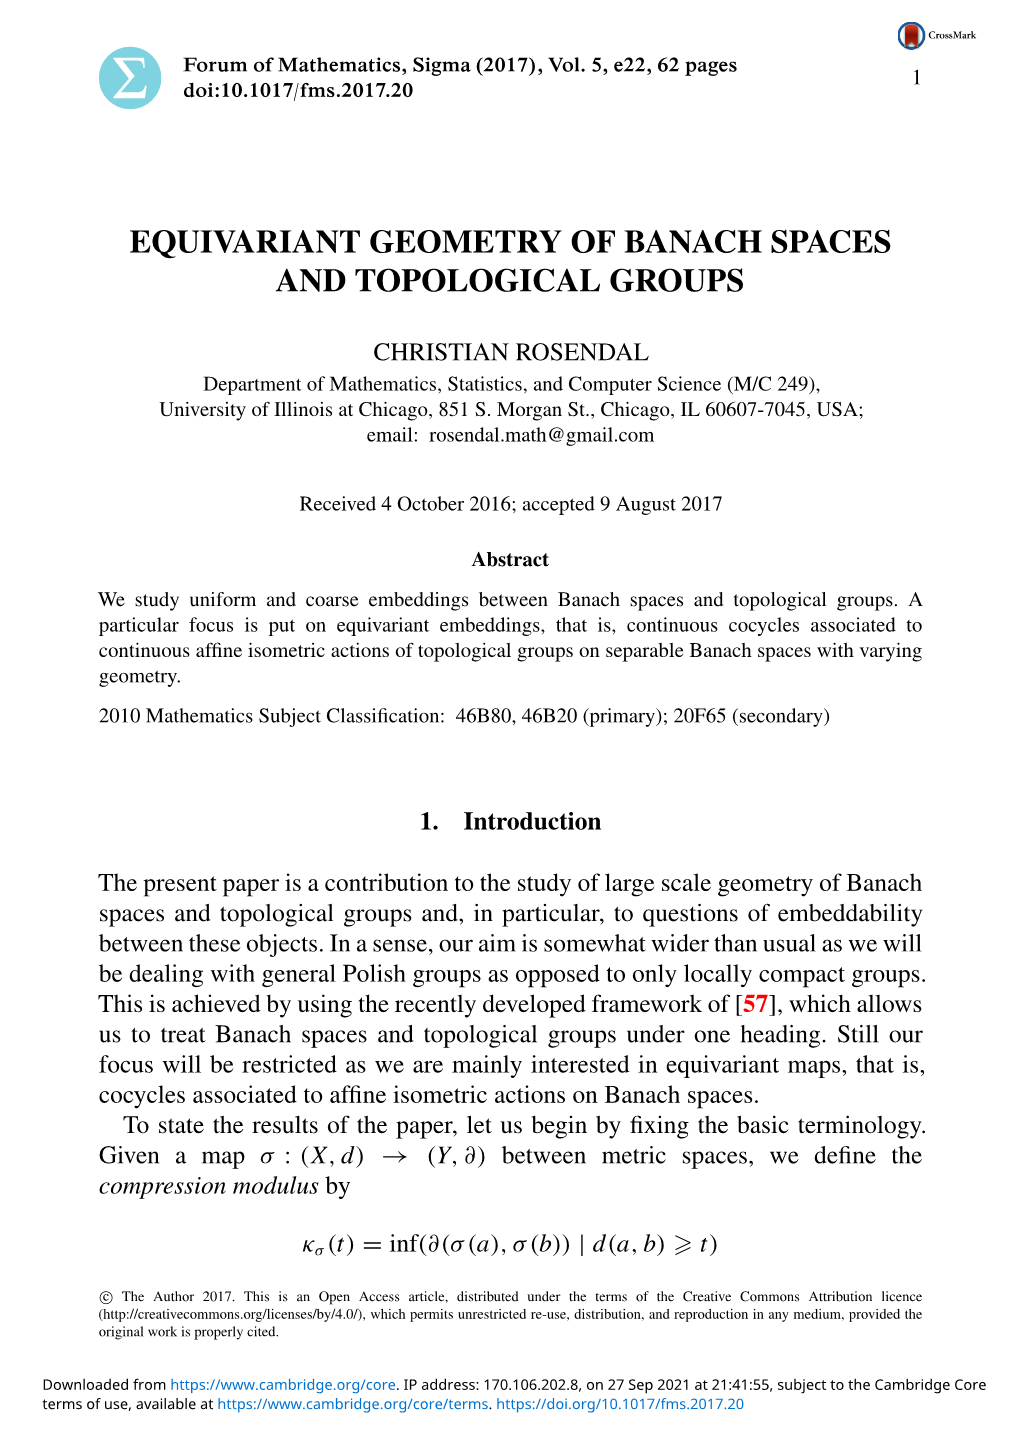 Equivariant Geometry of Banach Spaces and Topological Groups